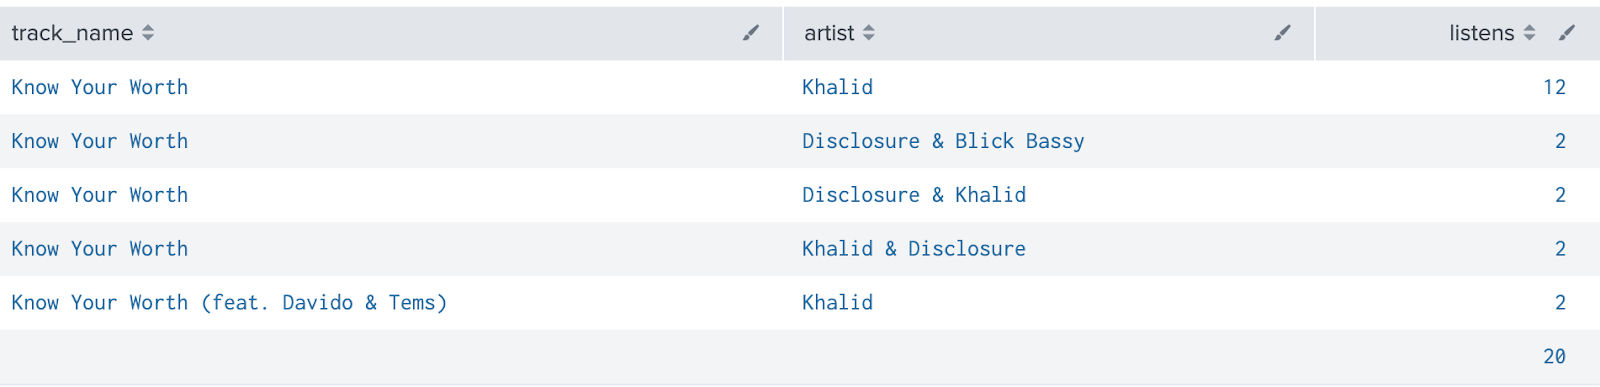 Screenshot showing the track_name Know Your Worth listed 5 times, with different artist permutations each time, Khalid, Disclosure & Khalid, Disclosure & Blick Bassy, Khalid & Disclosure, and Khalid, with total listens of 20 for all permutations.